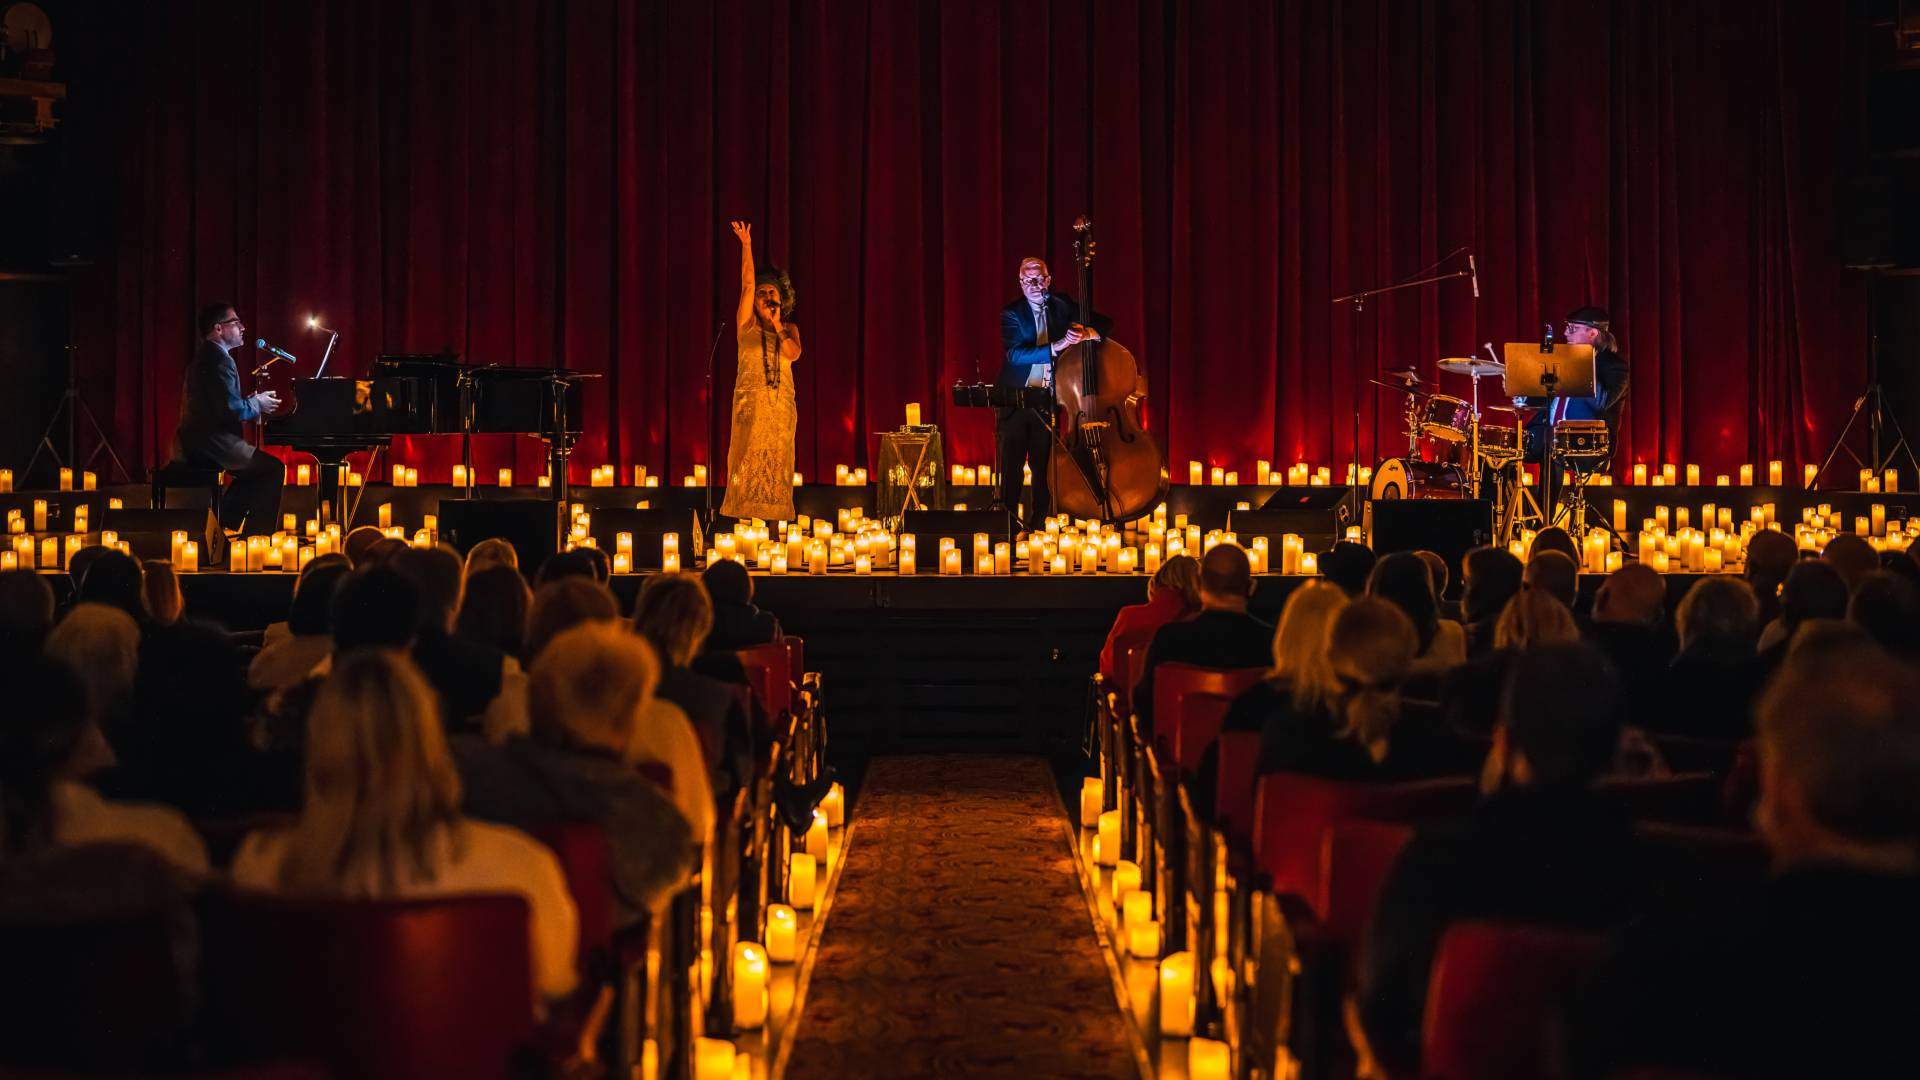 Candlelight Orchestra: Best of Joe Hisaishi and More